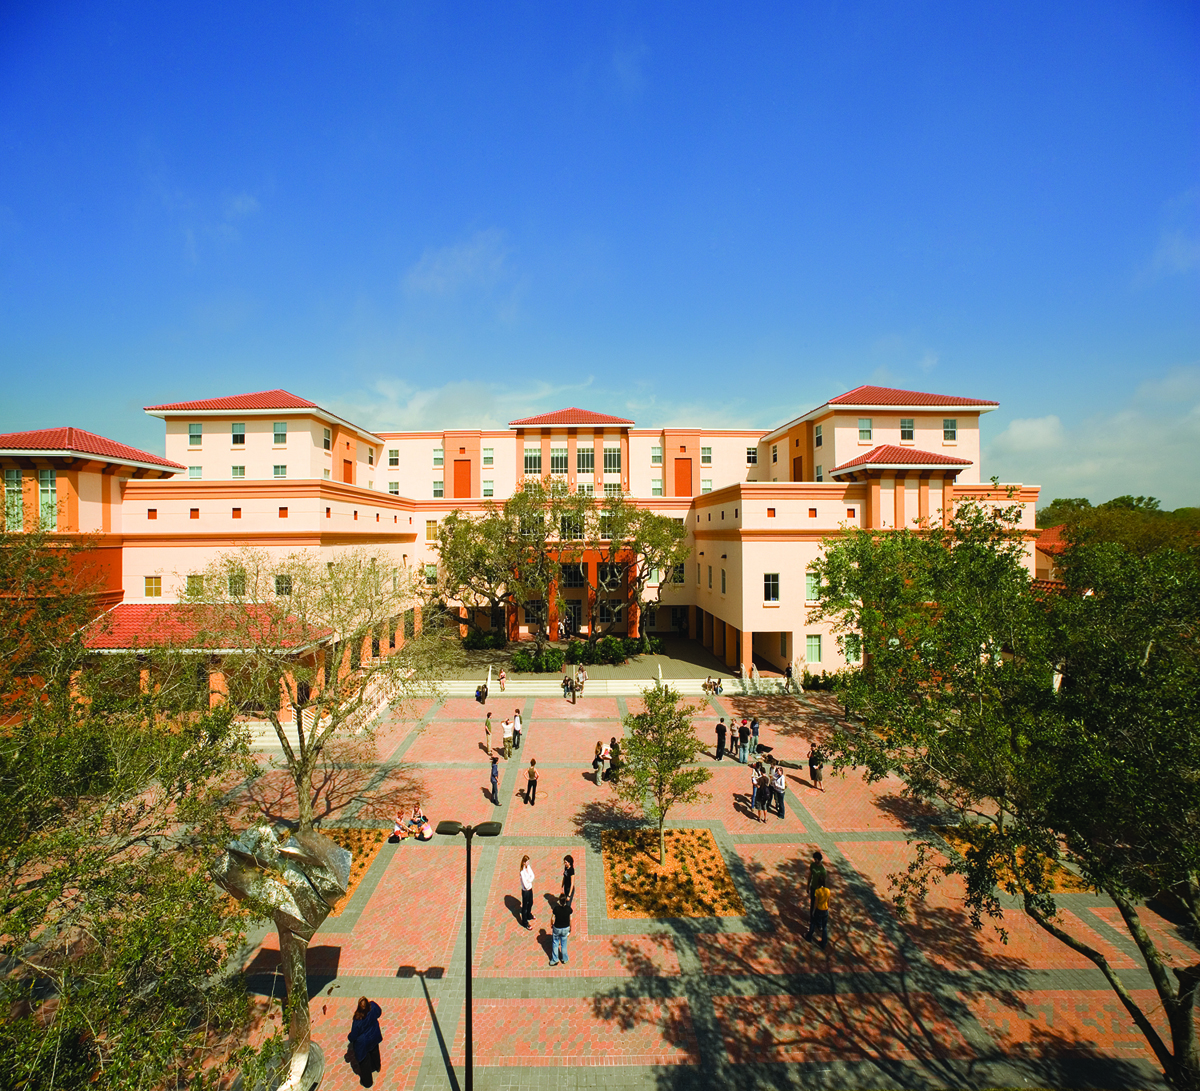 Ringling College of Art and Design campus